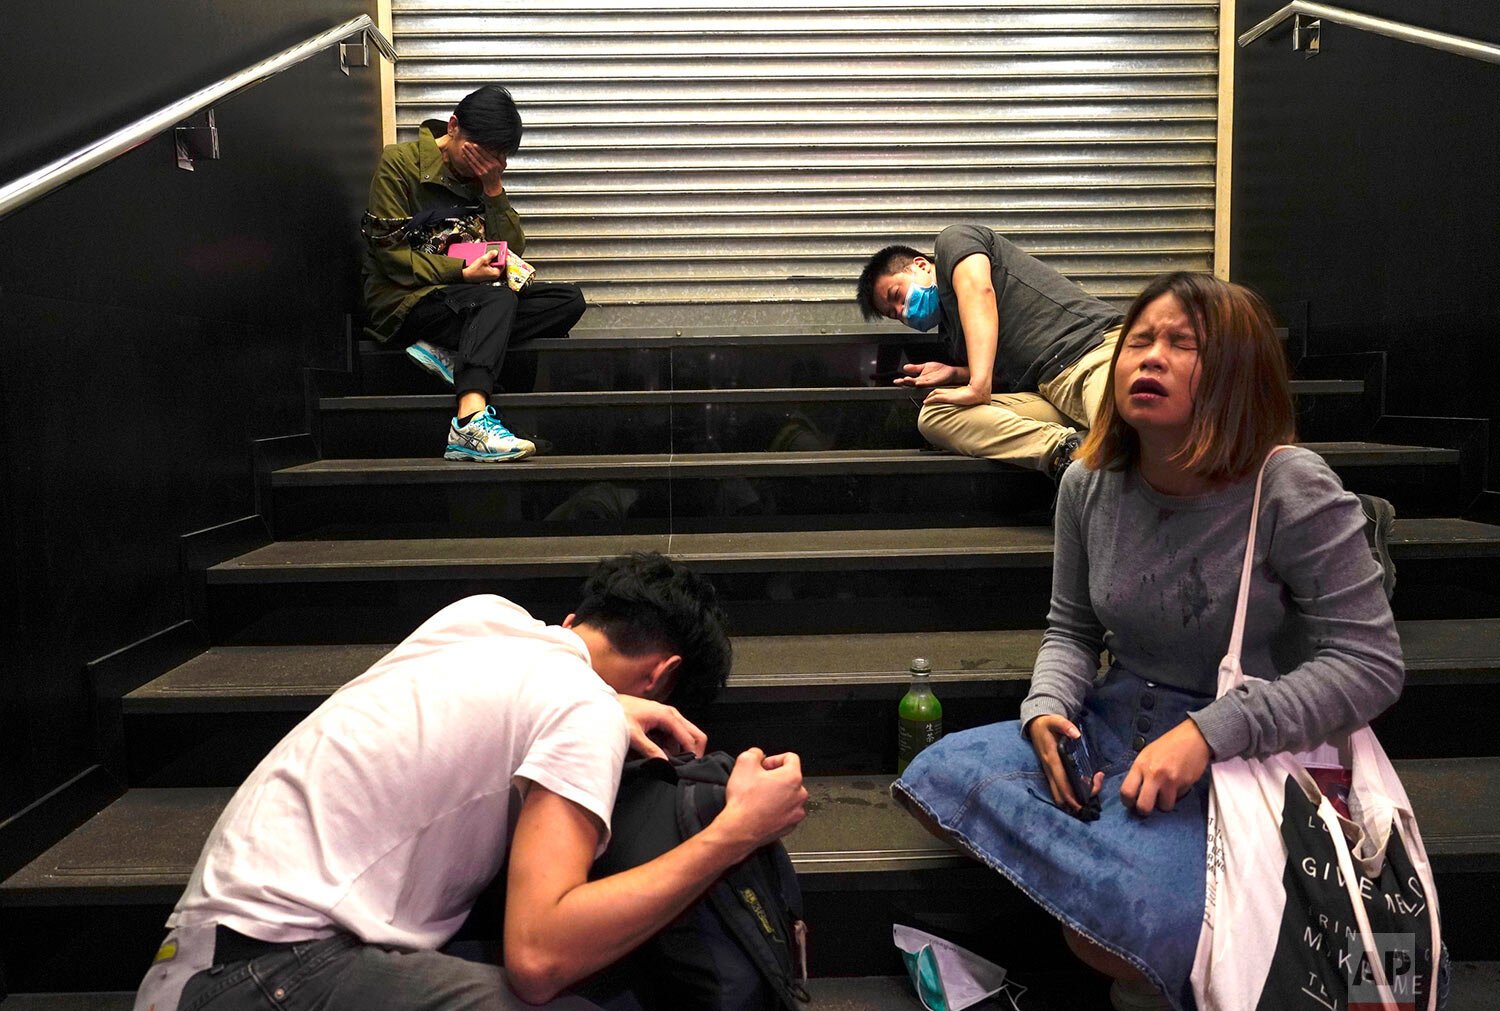  People affected by tear gas sit on steps to recover in the Central district of Hong Kong on Monday, Nov. 11, 2019. (AP Photo/Vincent Yu) 